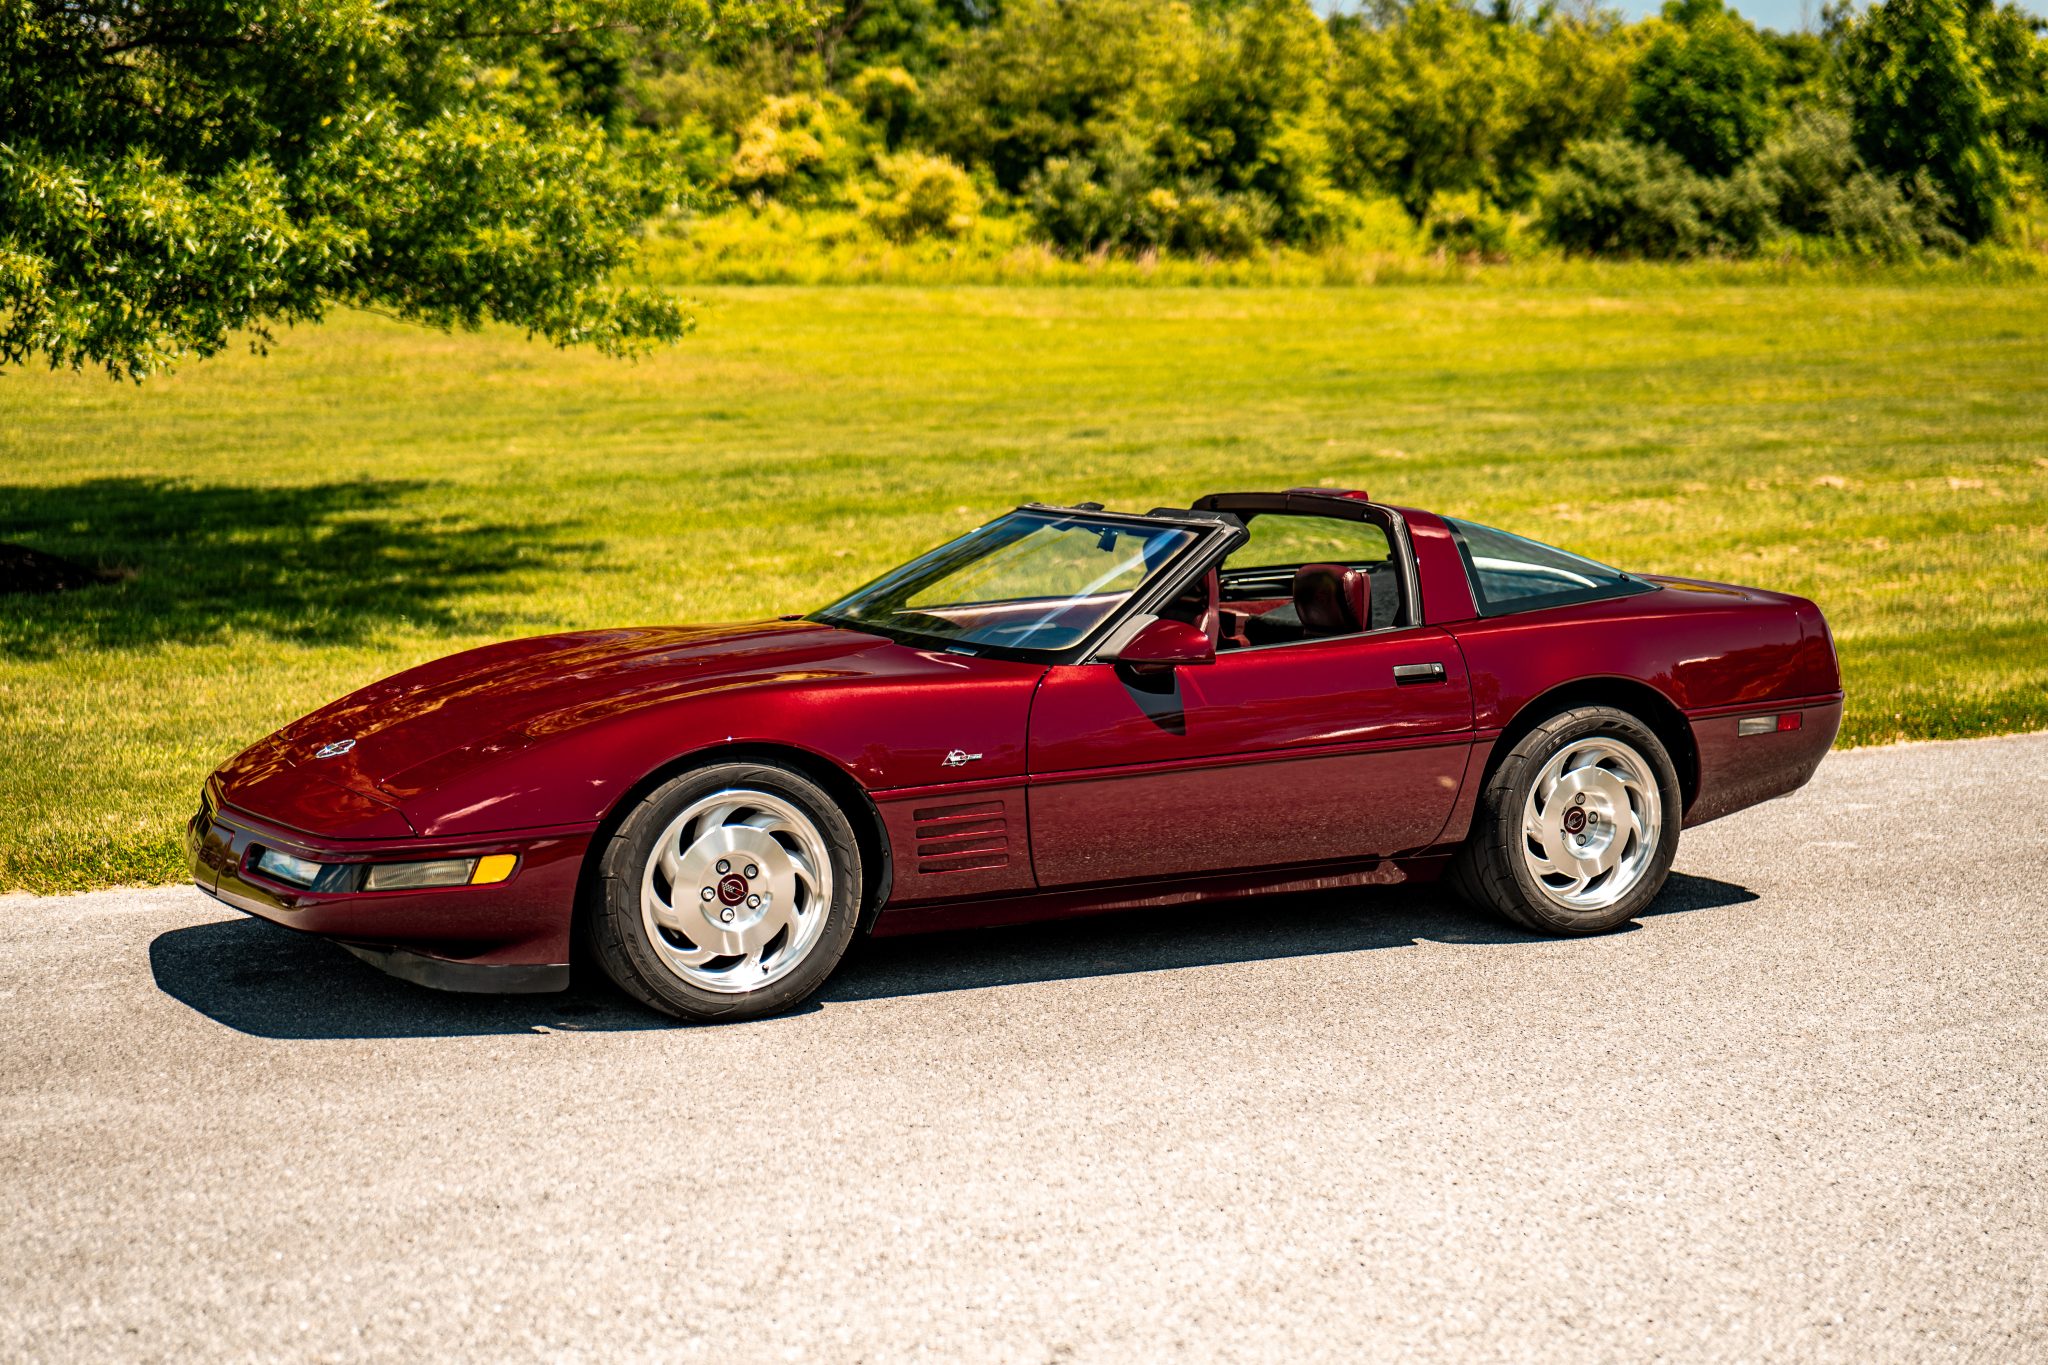 Used Lingenfelter-Modified 1993 Chevrolet Corvette Coupe ZR-1 40th Anniversary 6-Speed Review